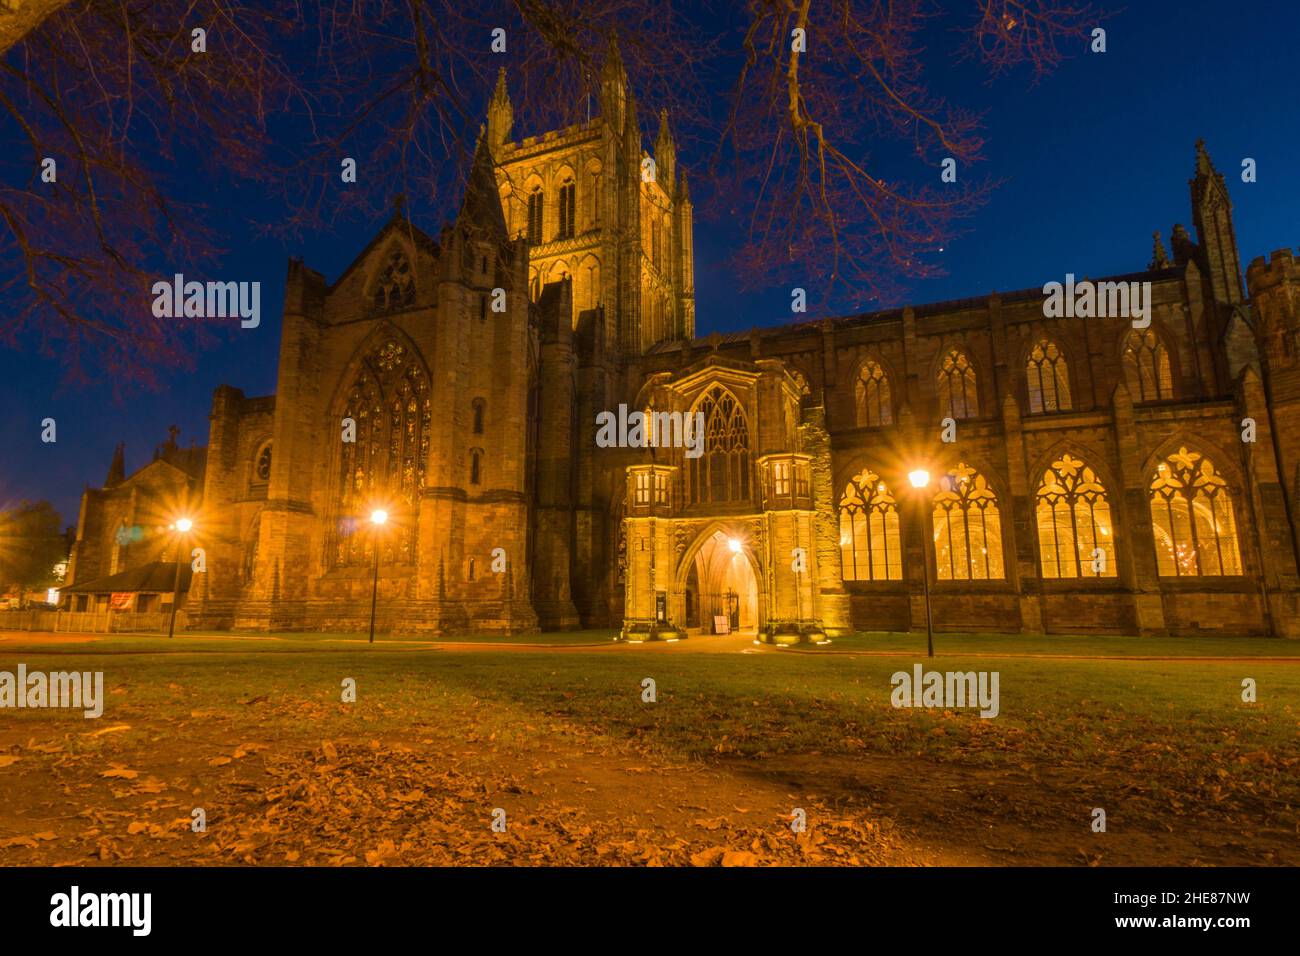 Hereford Cathedral illuminated under the evening sky. Hereford England UK. December 2021 Stock Photo